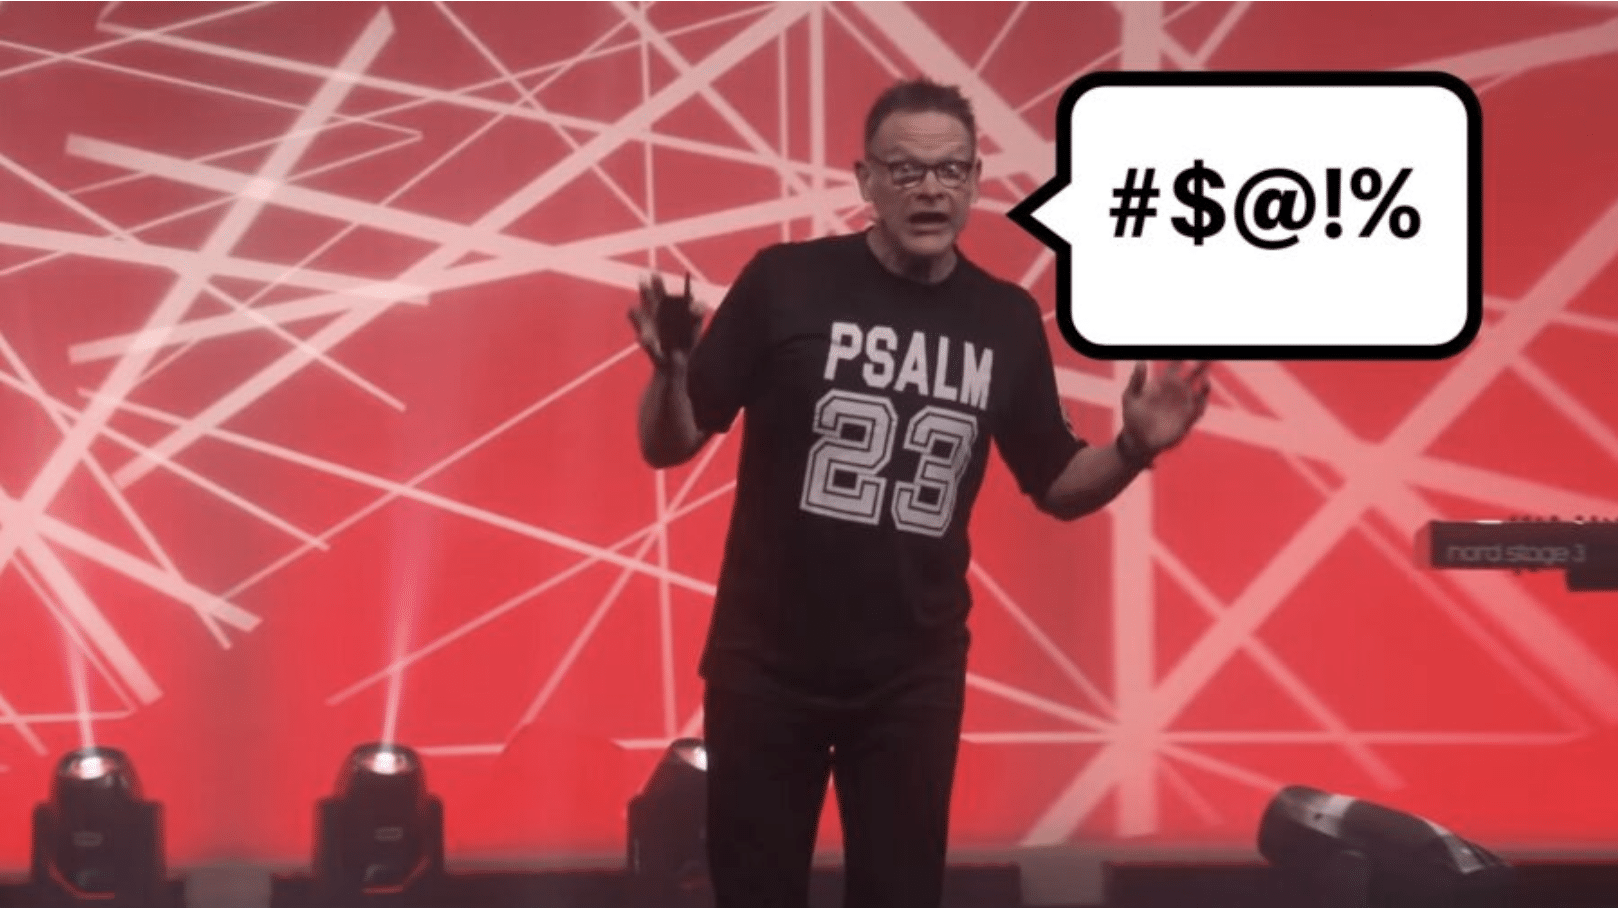 Megachurch Pastor Perry Noble swears during sermon and says if you’re offended “you’re the problem”